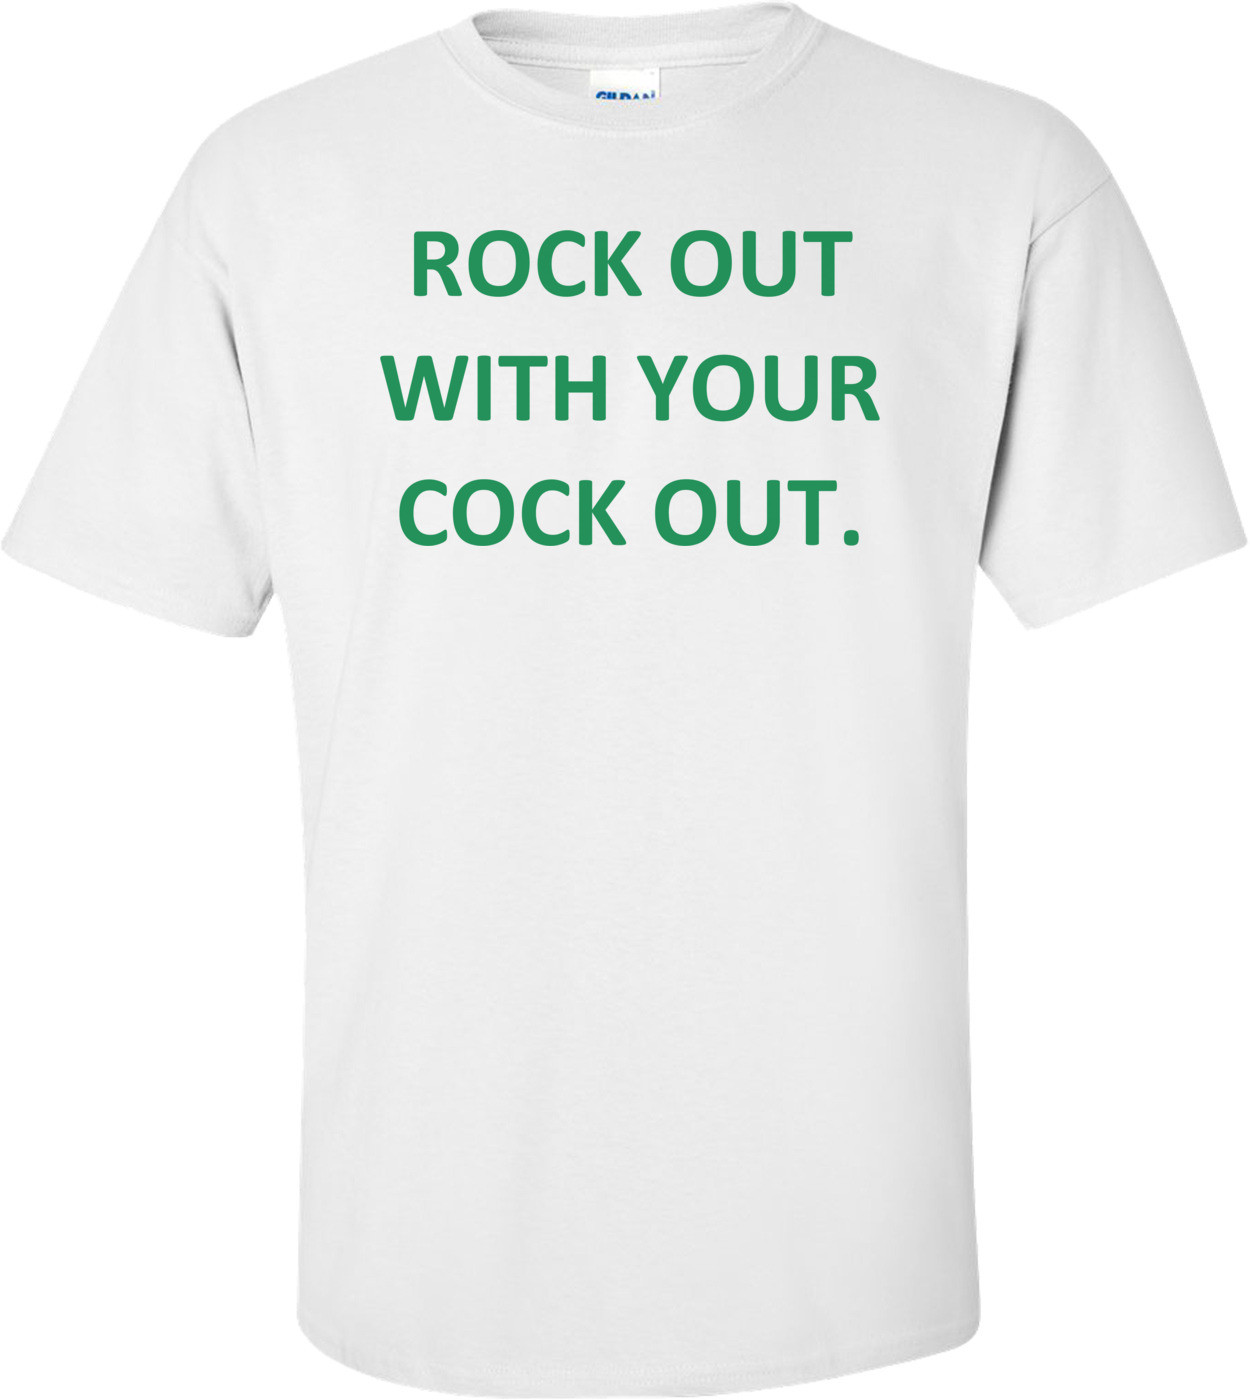 ROCK OUT WITH YOUR COCK OUT. Shirt